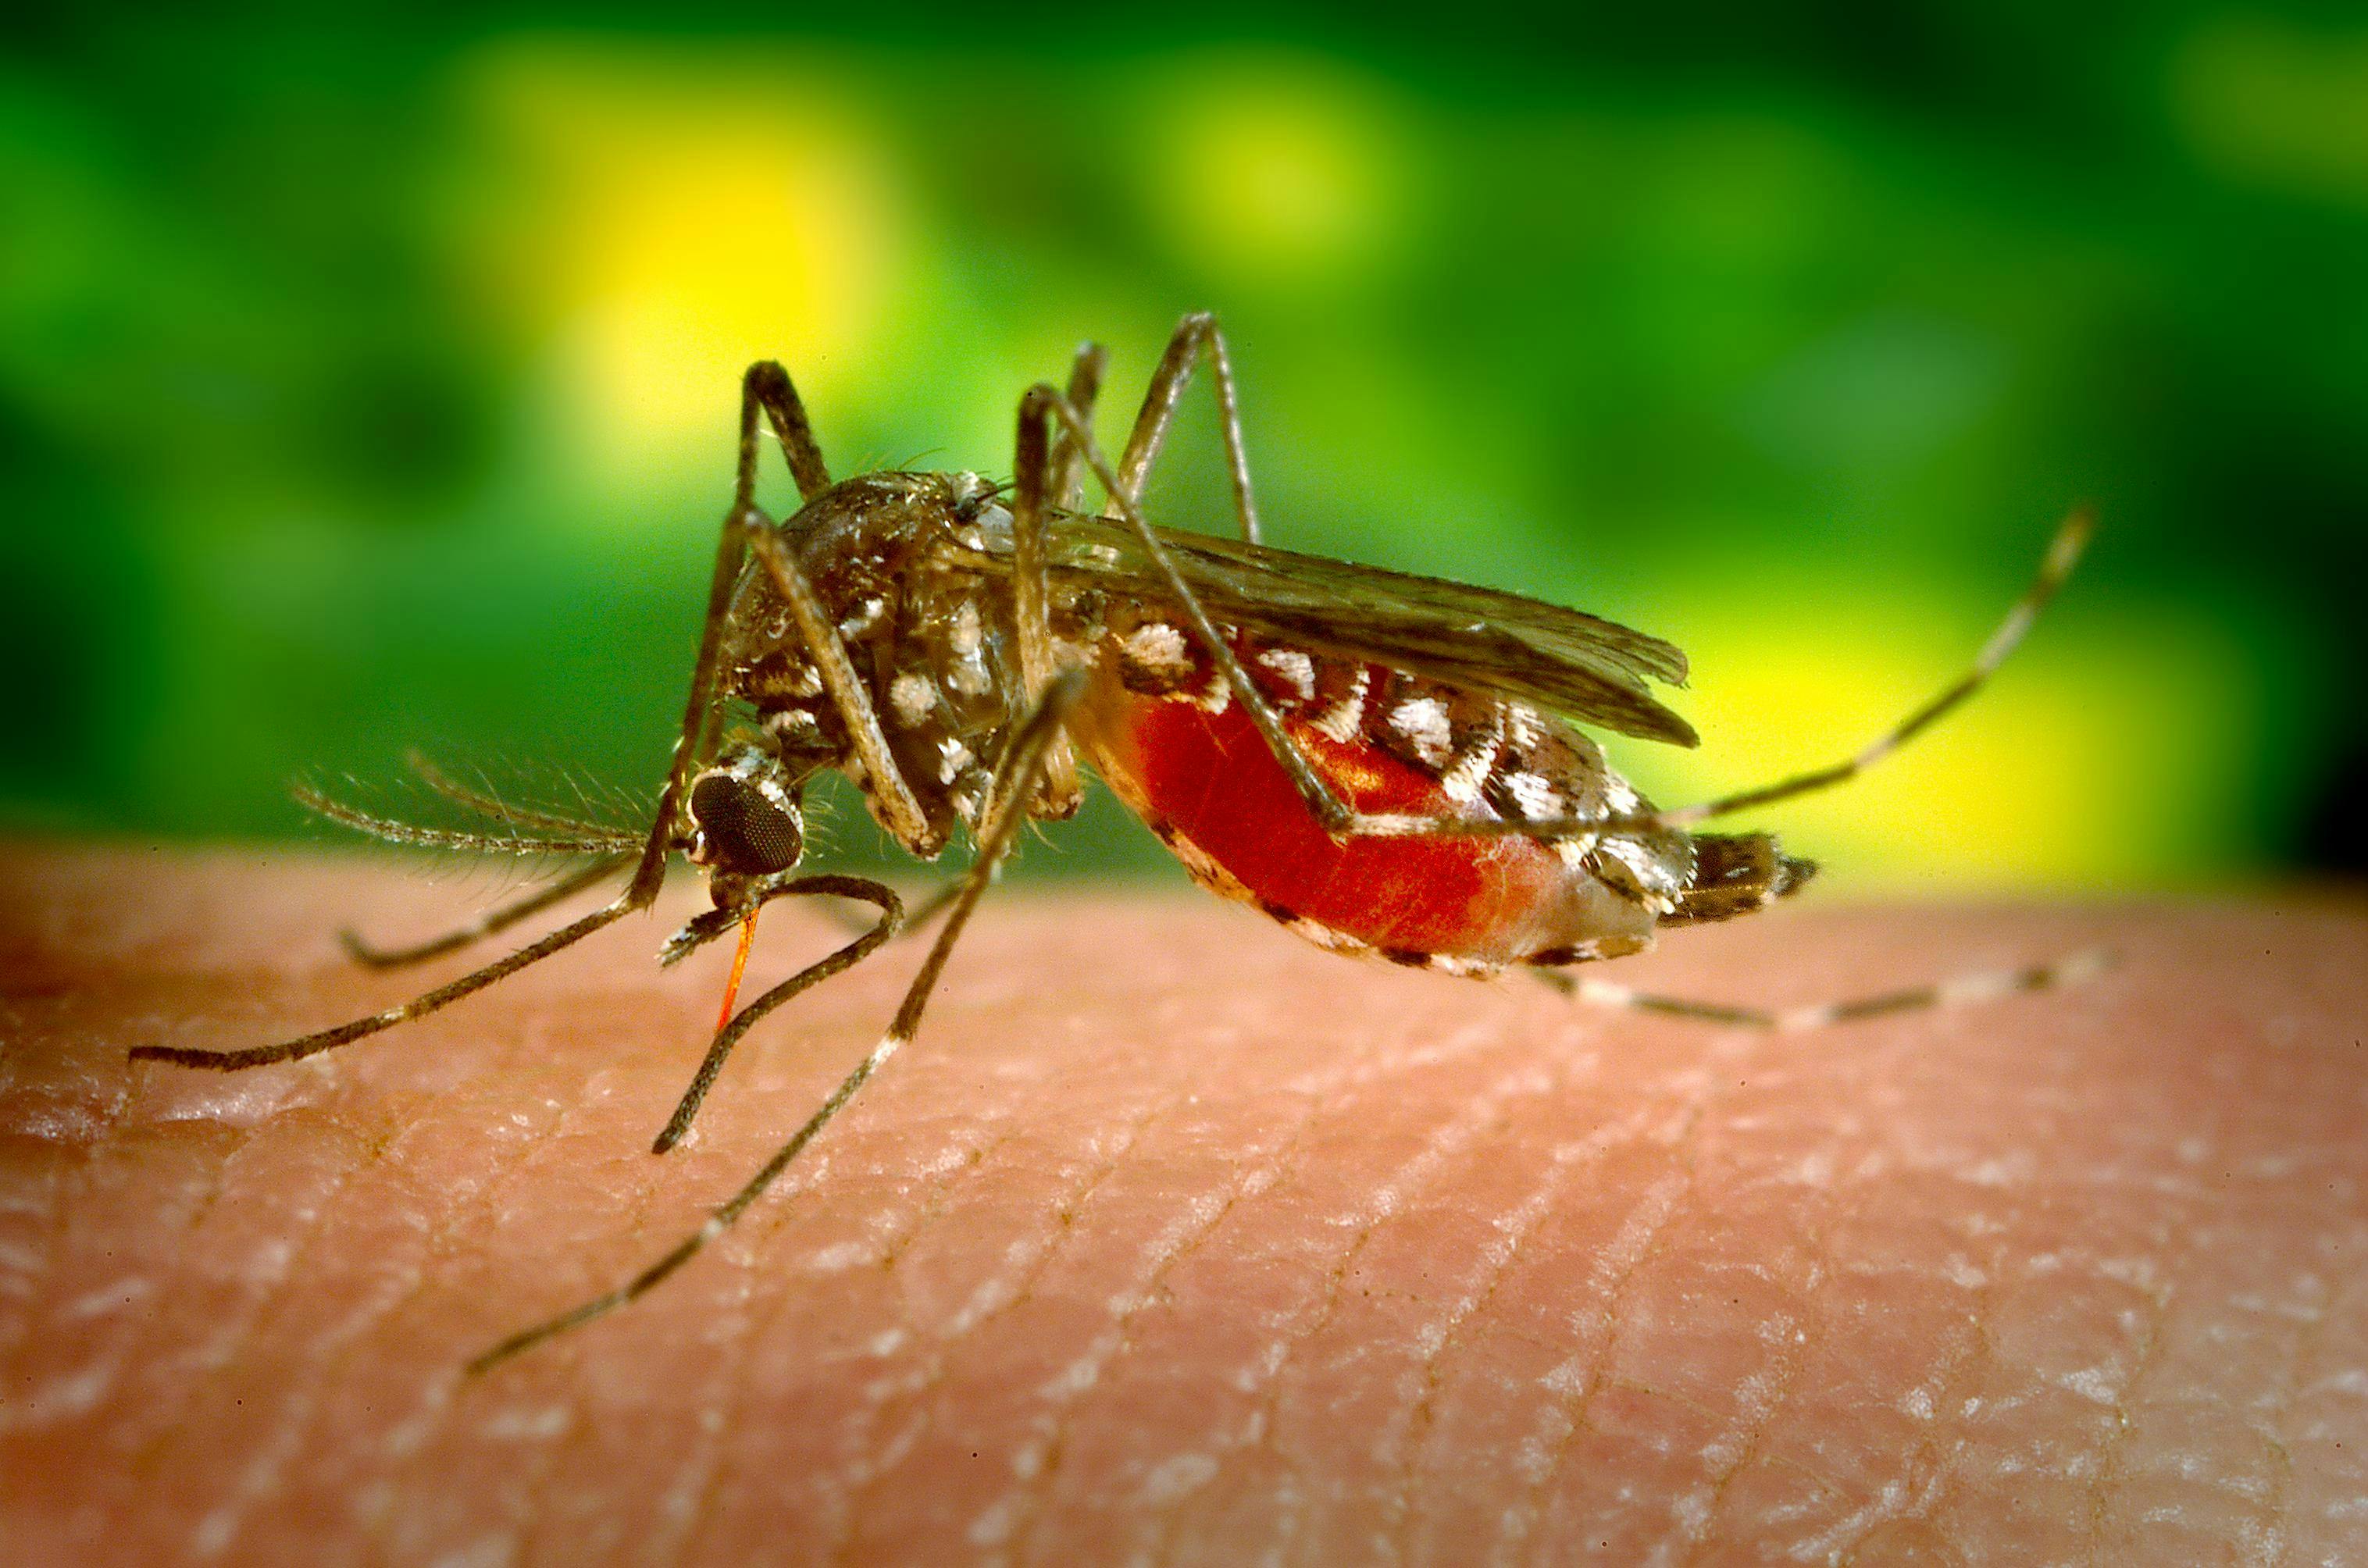 Monoclonal Antibody in Development for Malaria Will Move Ahead This Year